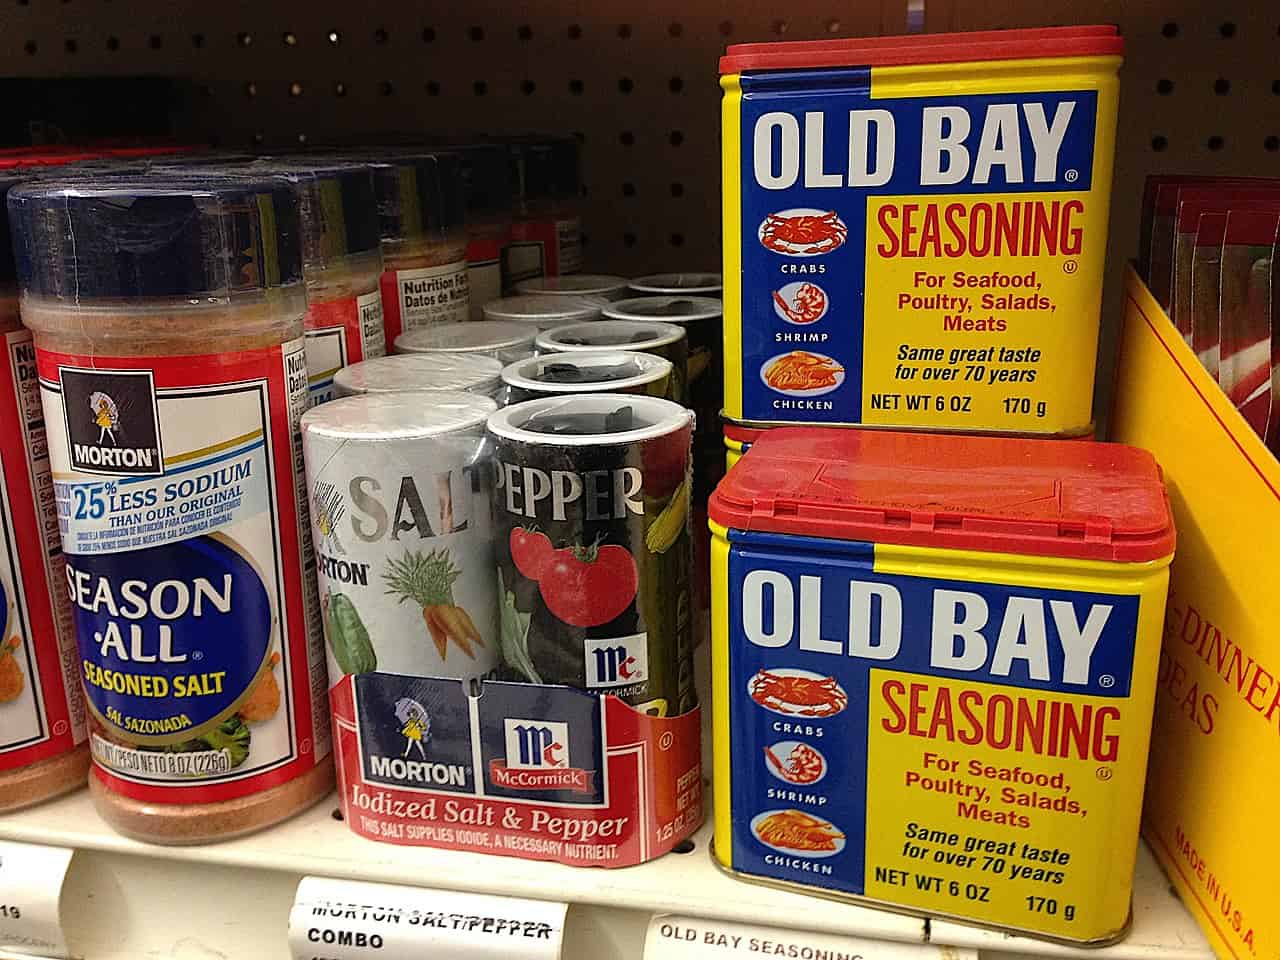 Old Bay Seasoning can be found easily in many supermarkets, especially in Maryland.